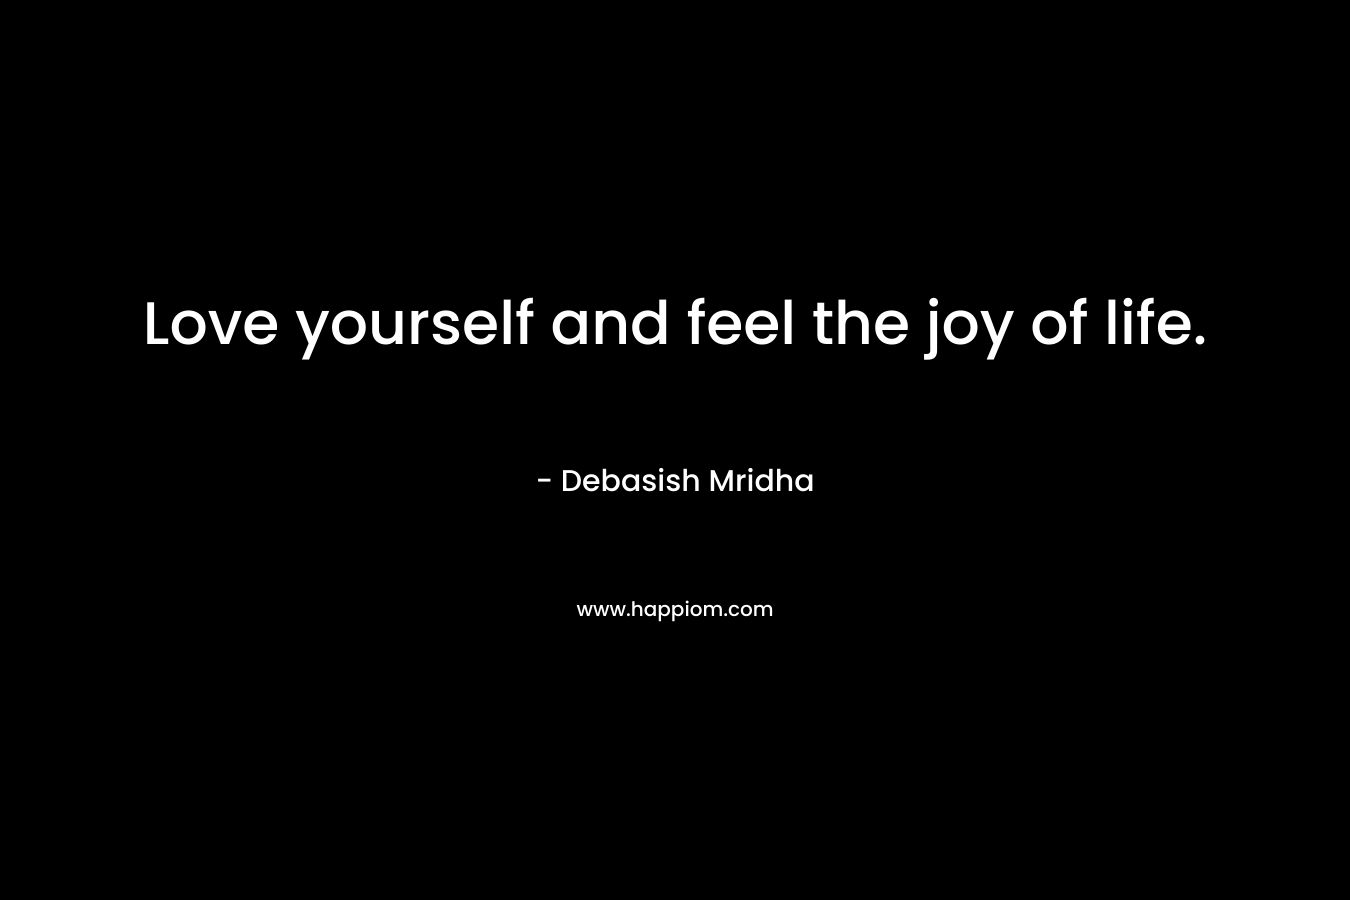 Love yourself and feel the joy of life.